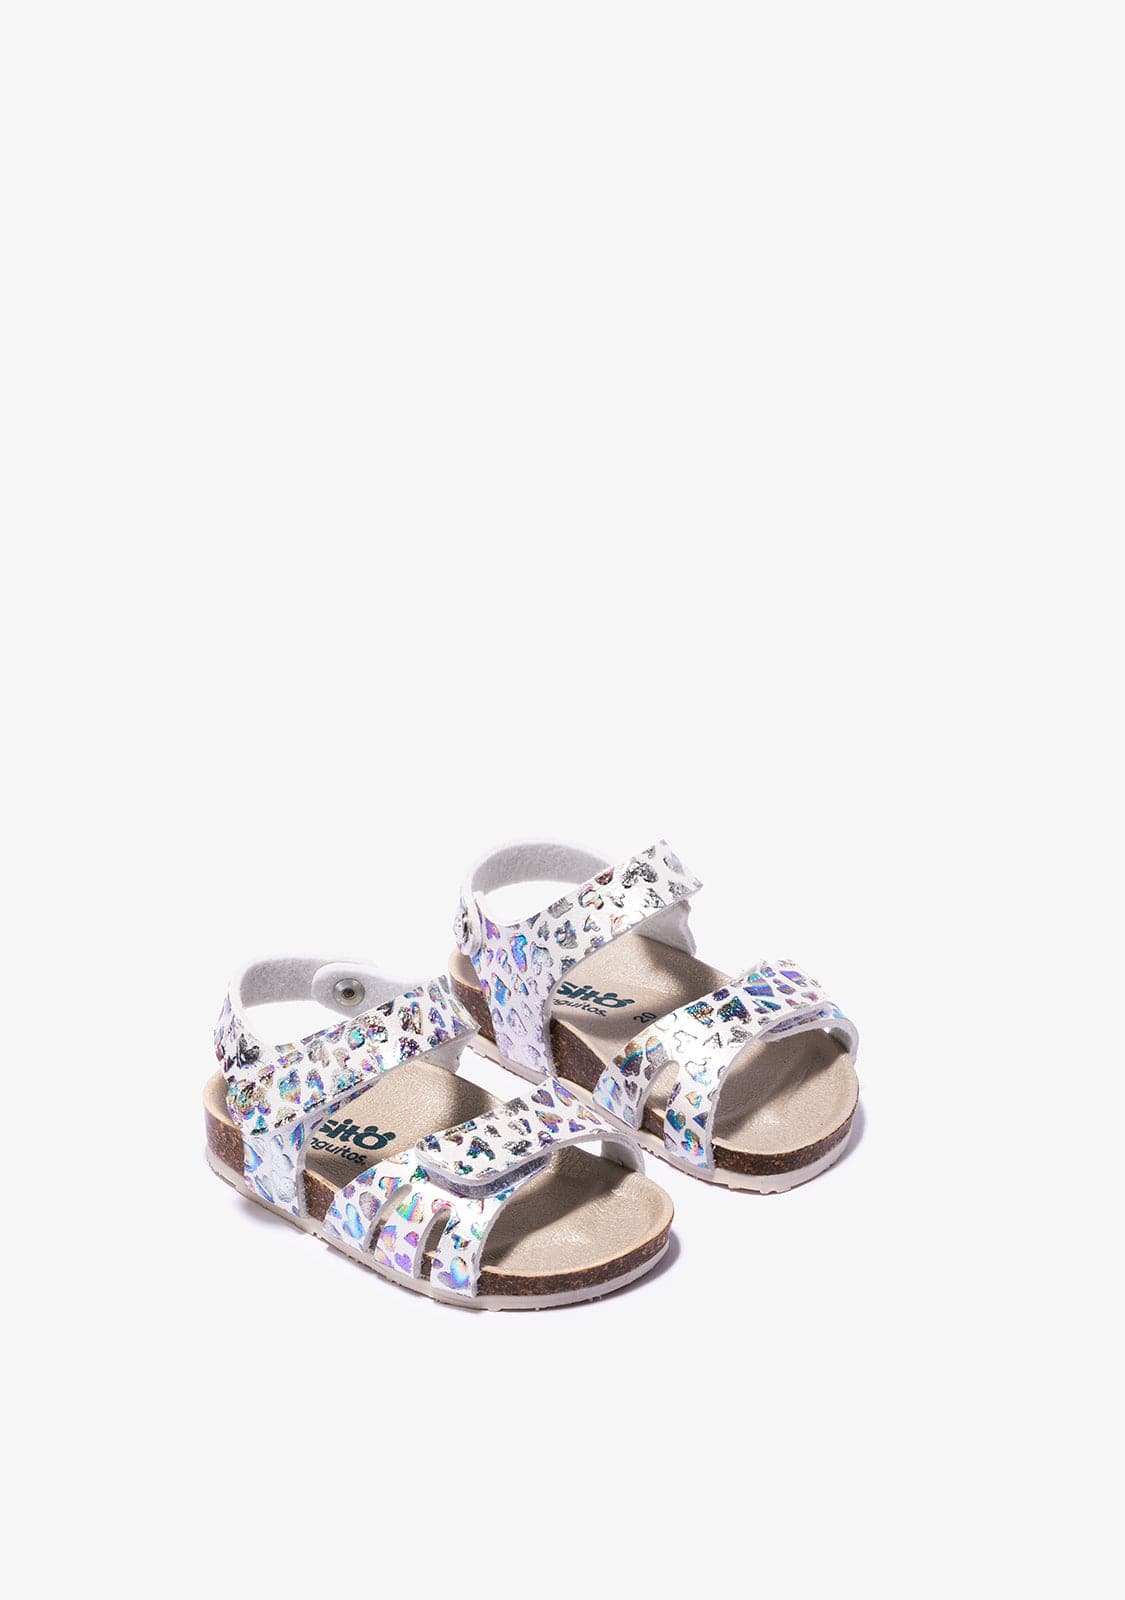 OSITO Shoes Baby's Bio Hearts Sandals